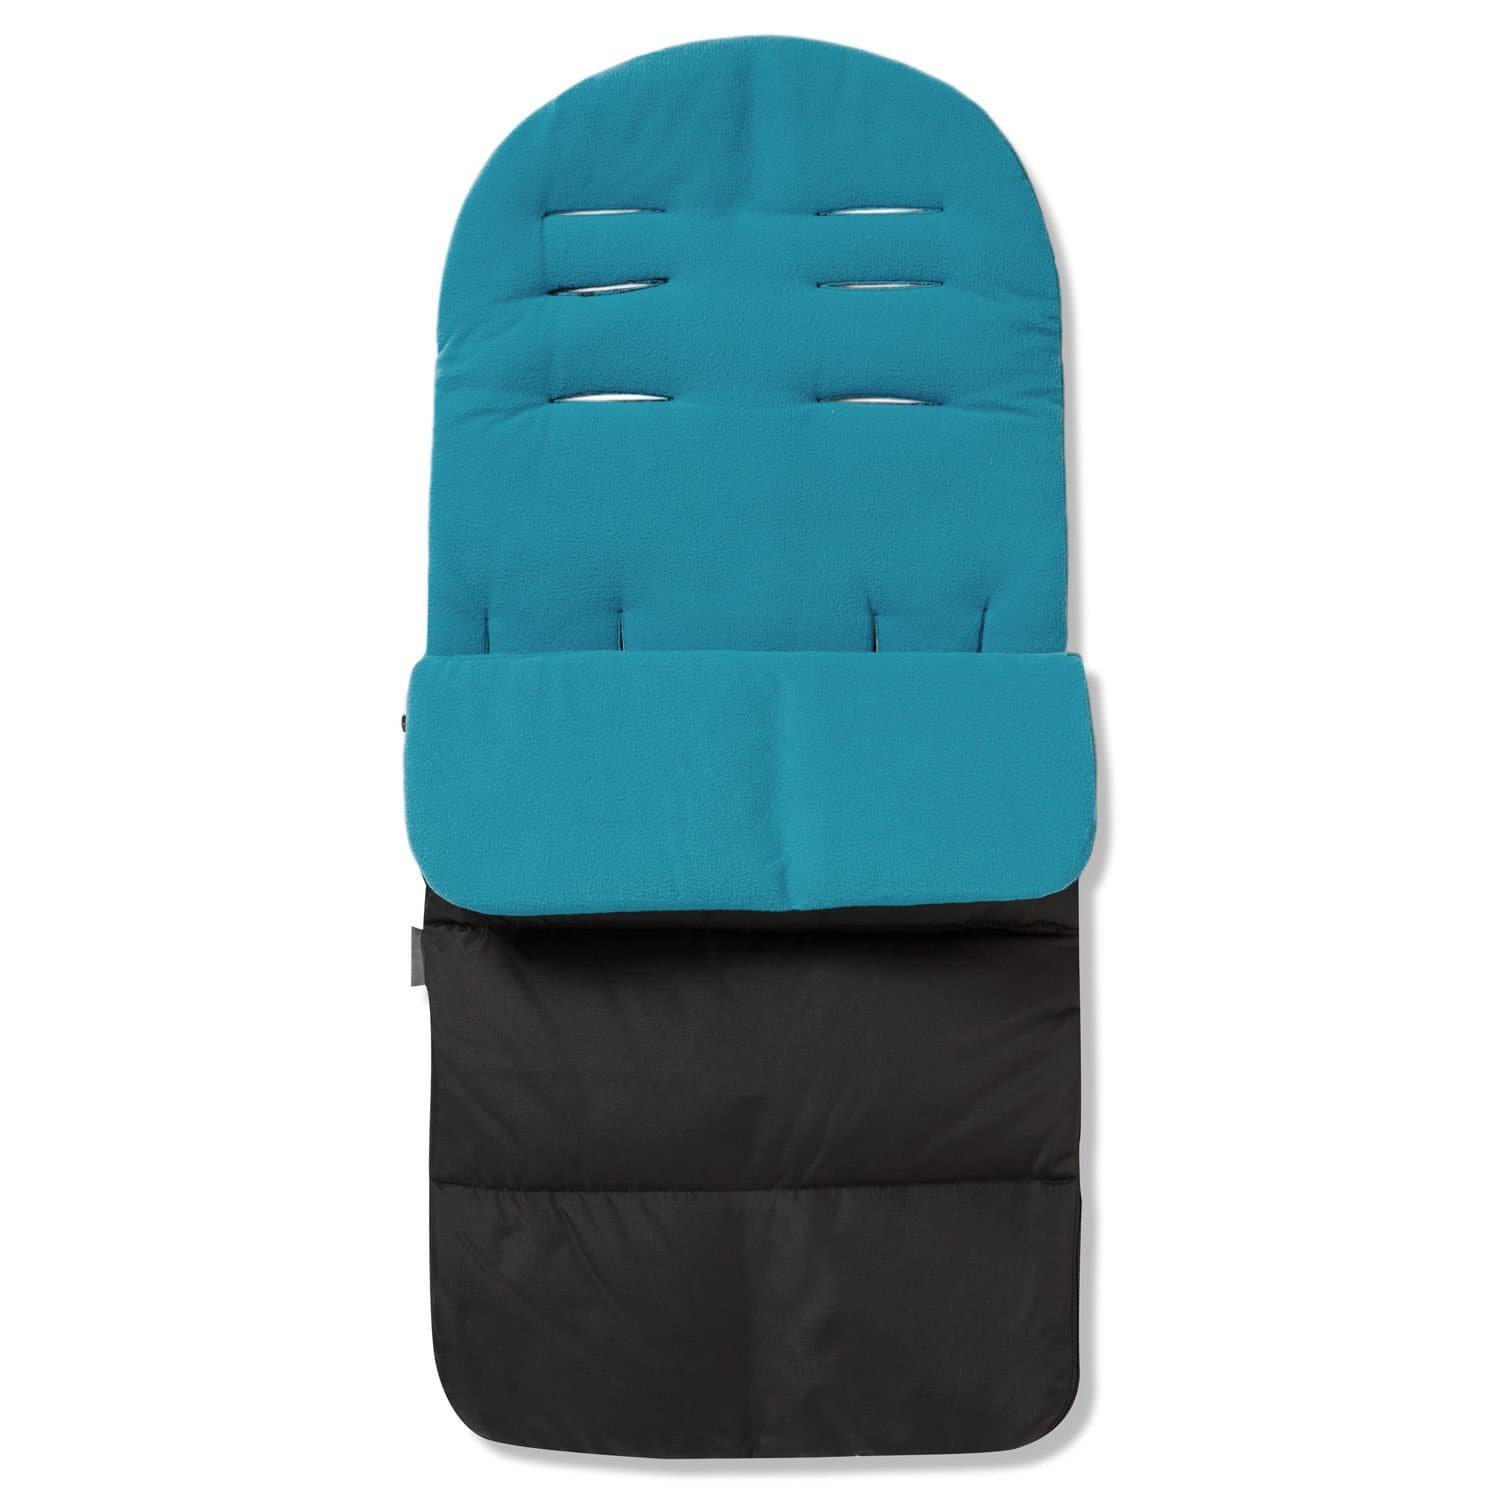 Premium Footmuff / Cosy Toes Compatible with Egg - Ocean Blue / Fits All Models | For Your Little One